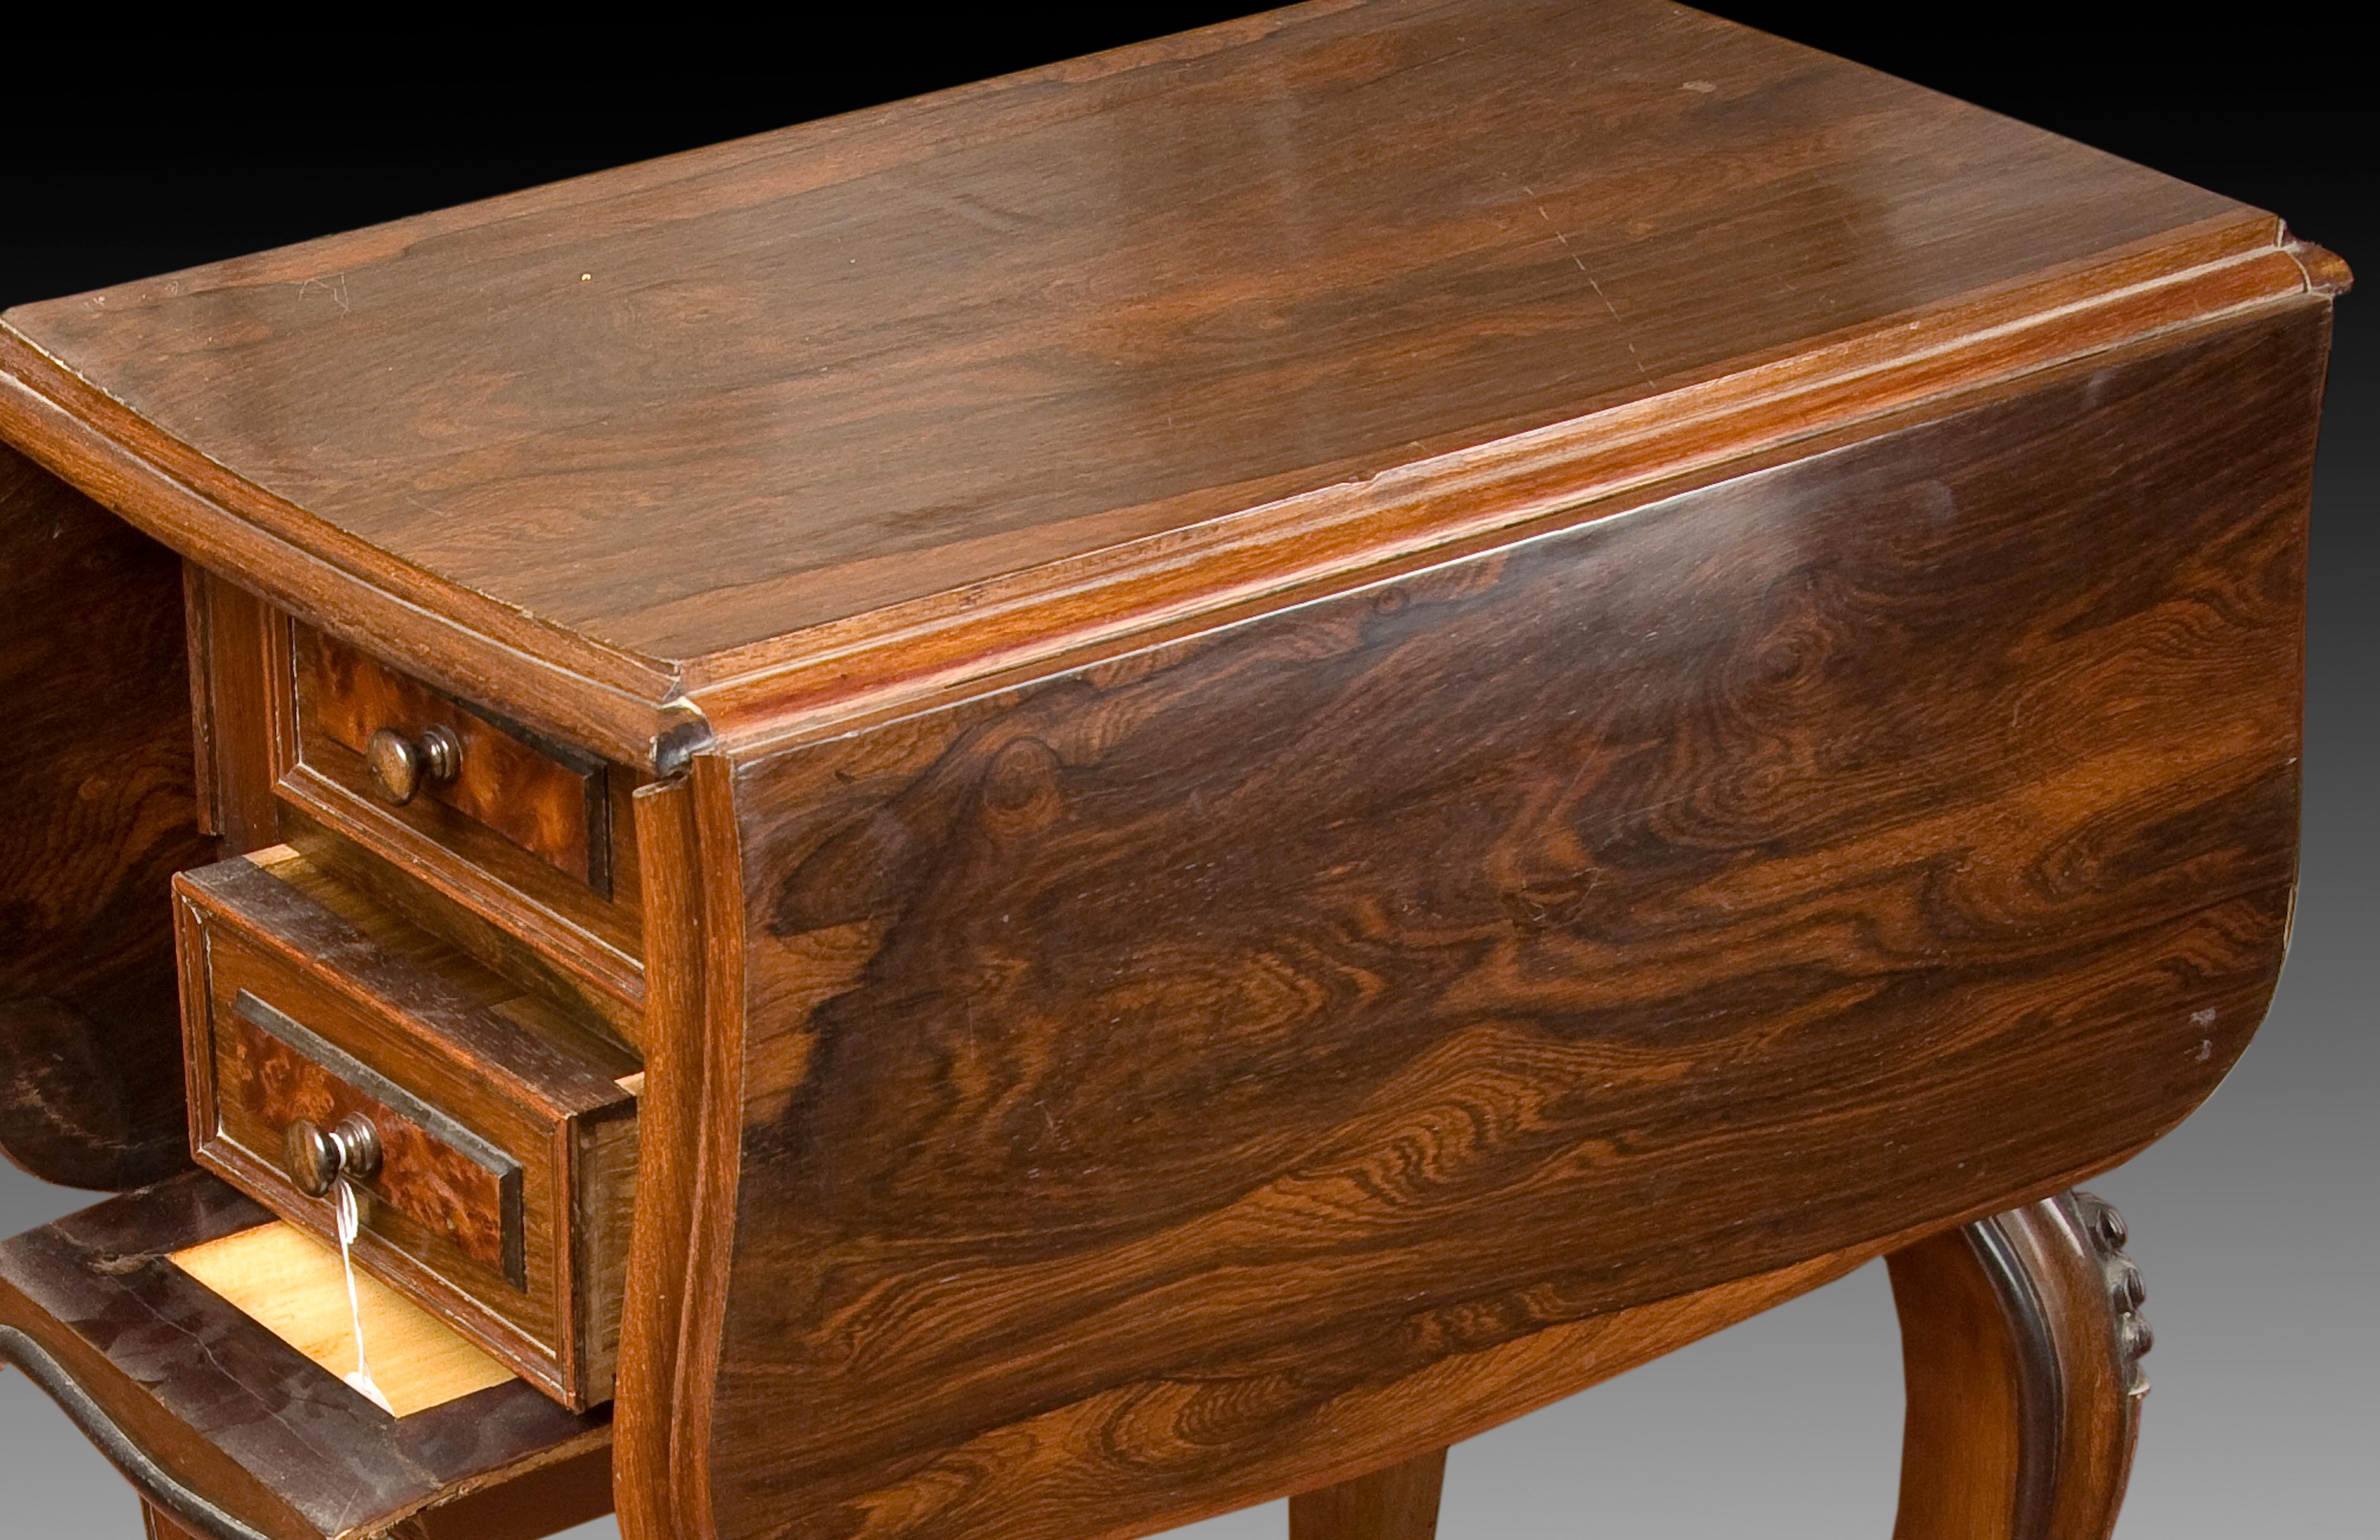 European Sewing Table with Wings, Palosanto or Rosewood Wood, 19th Century For Sale